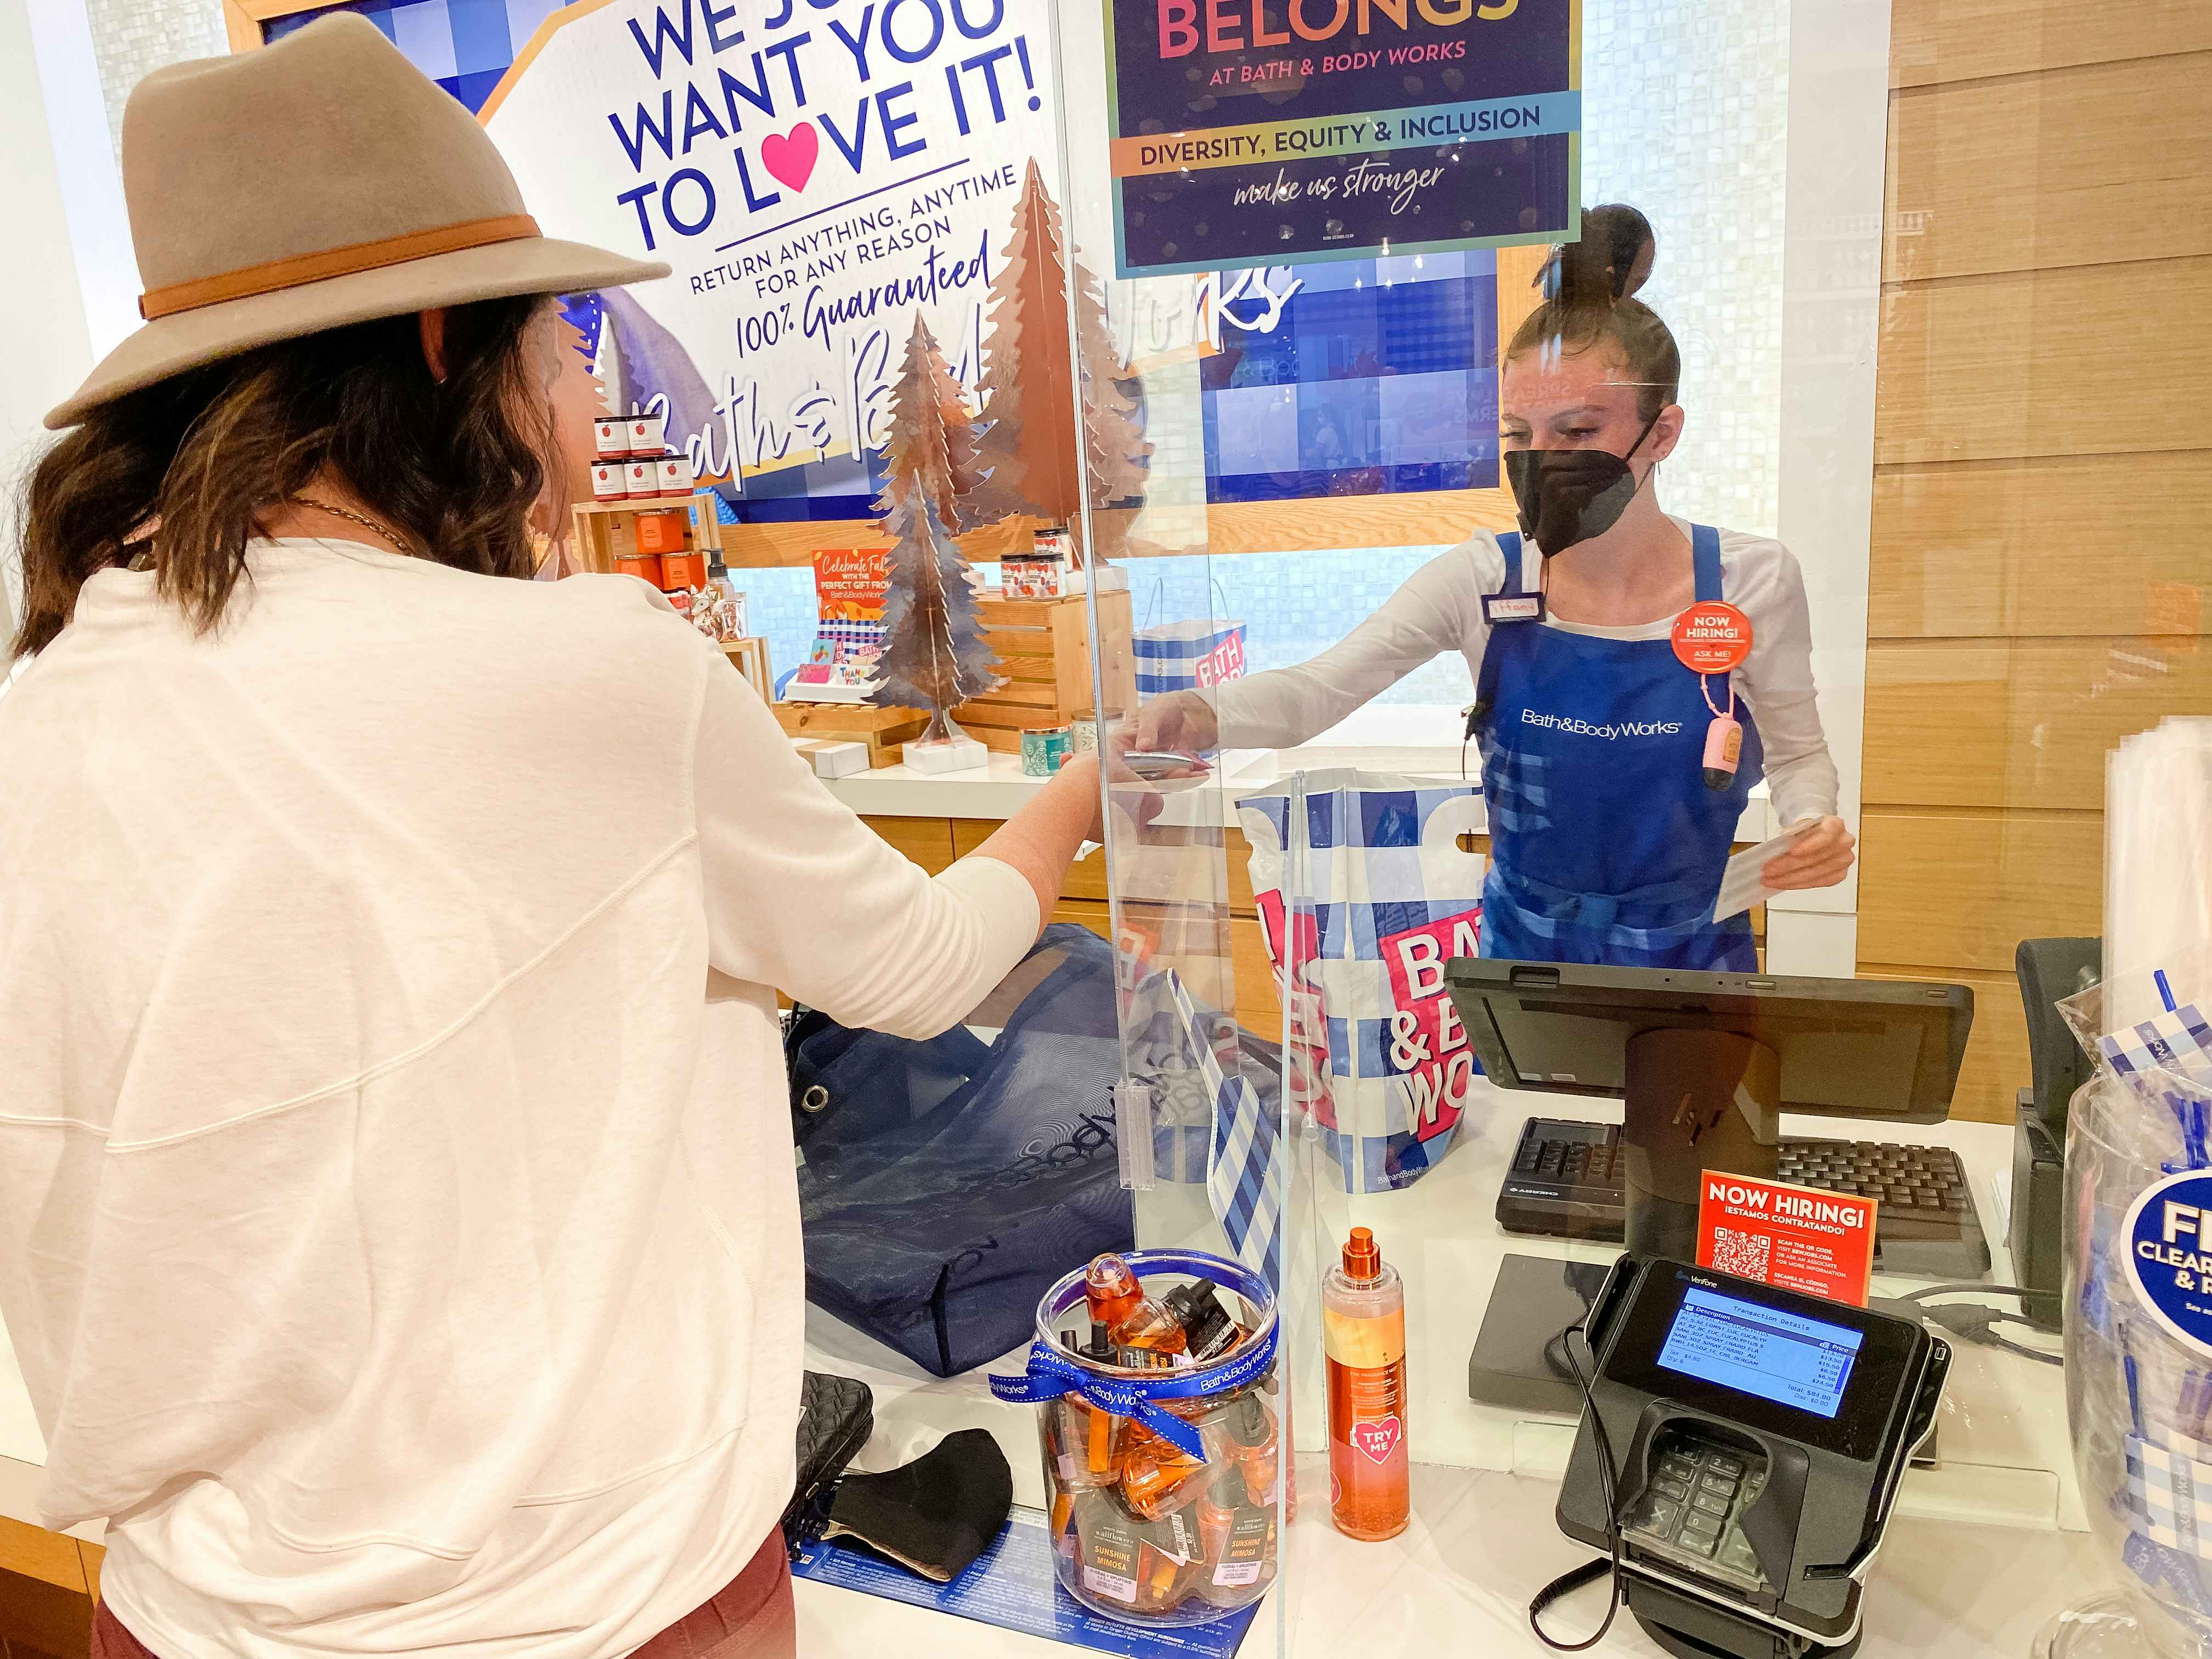 A woman standing at the checkout counter at Bath & Body Works, handing something to the cashier.